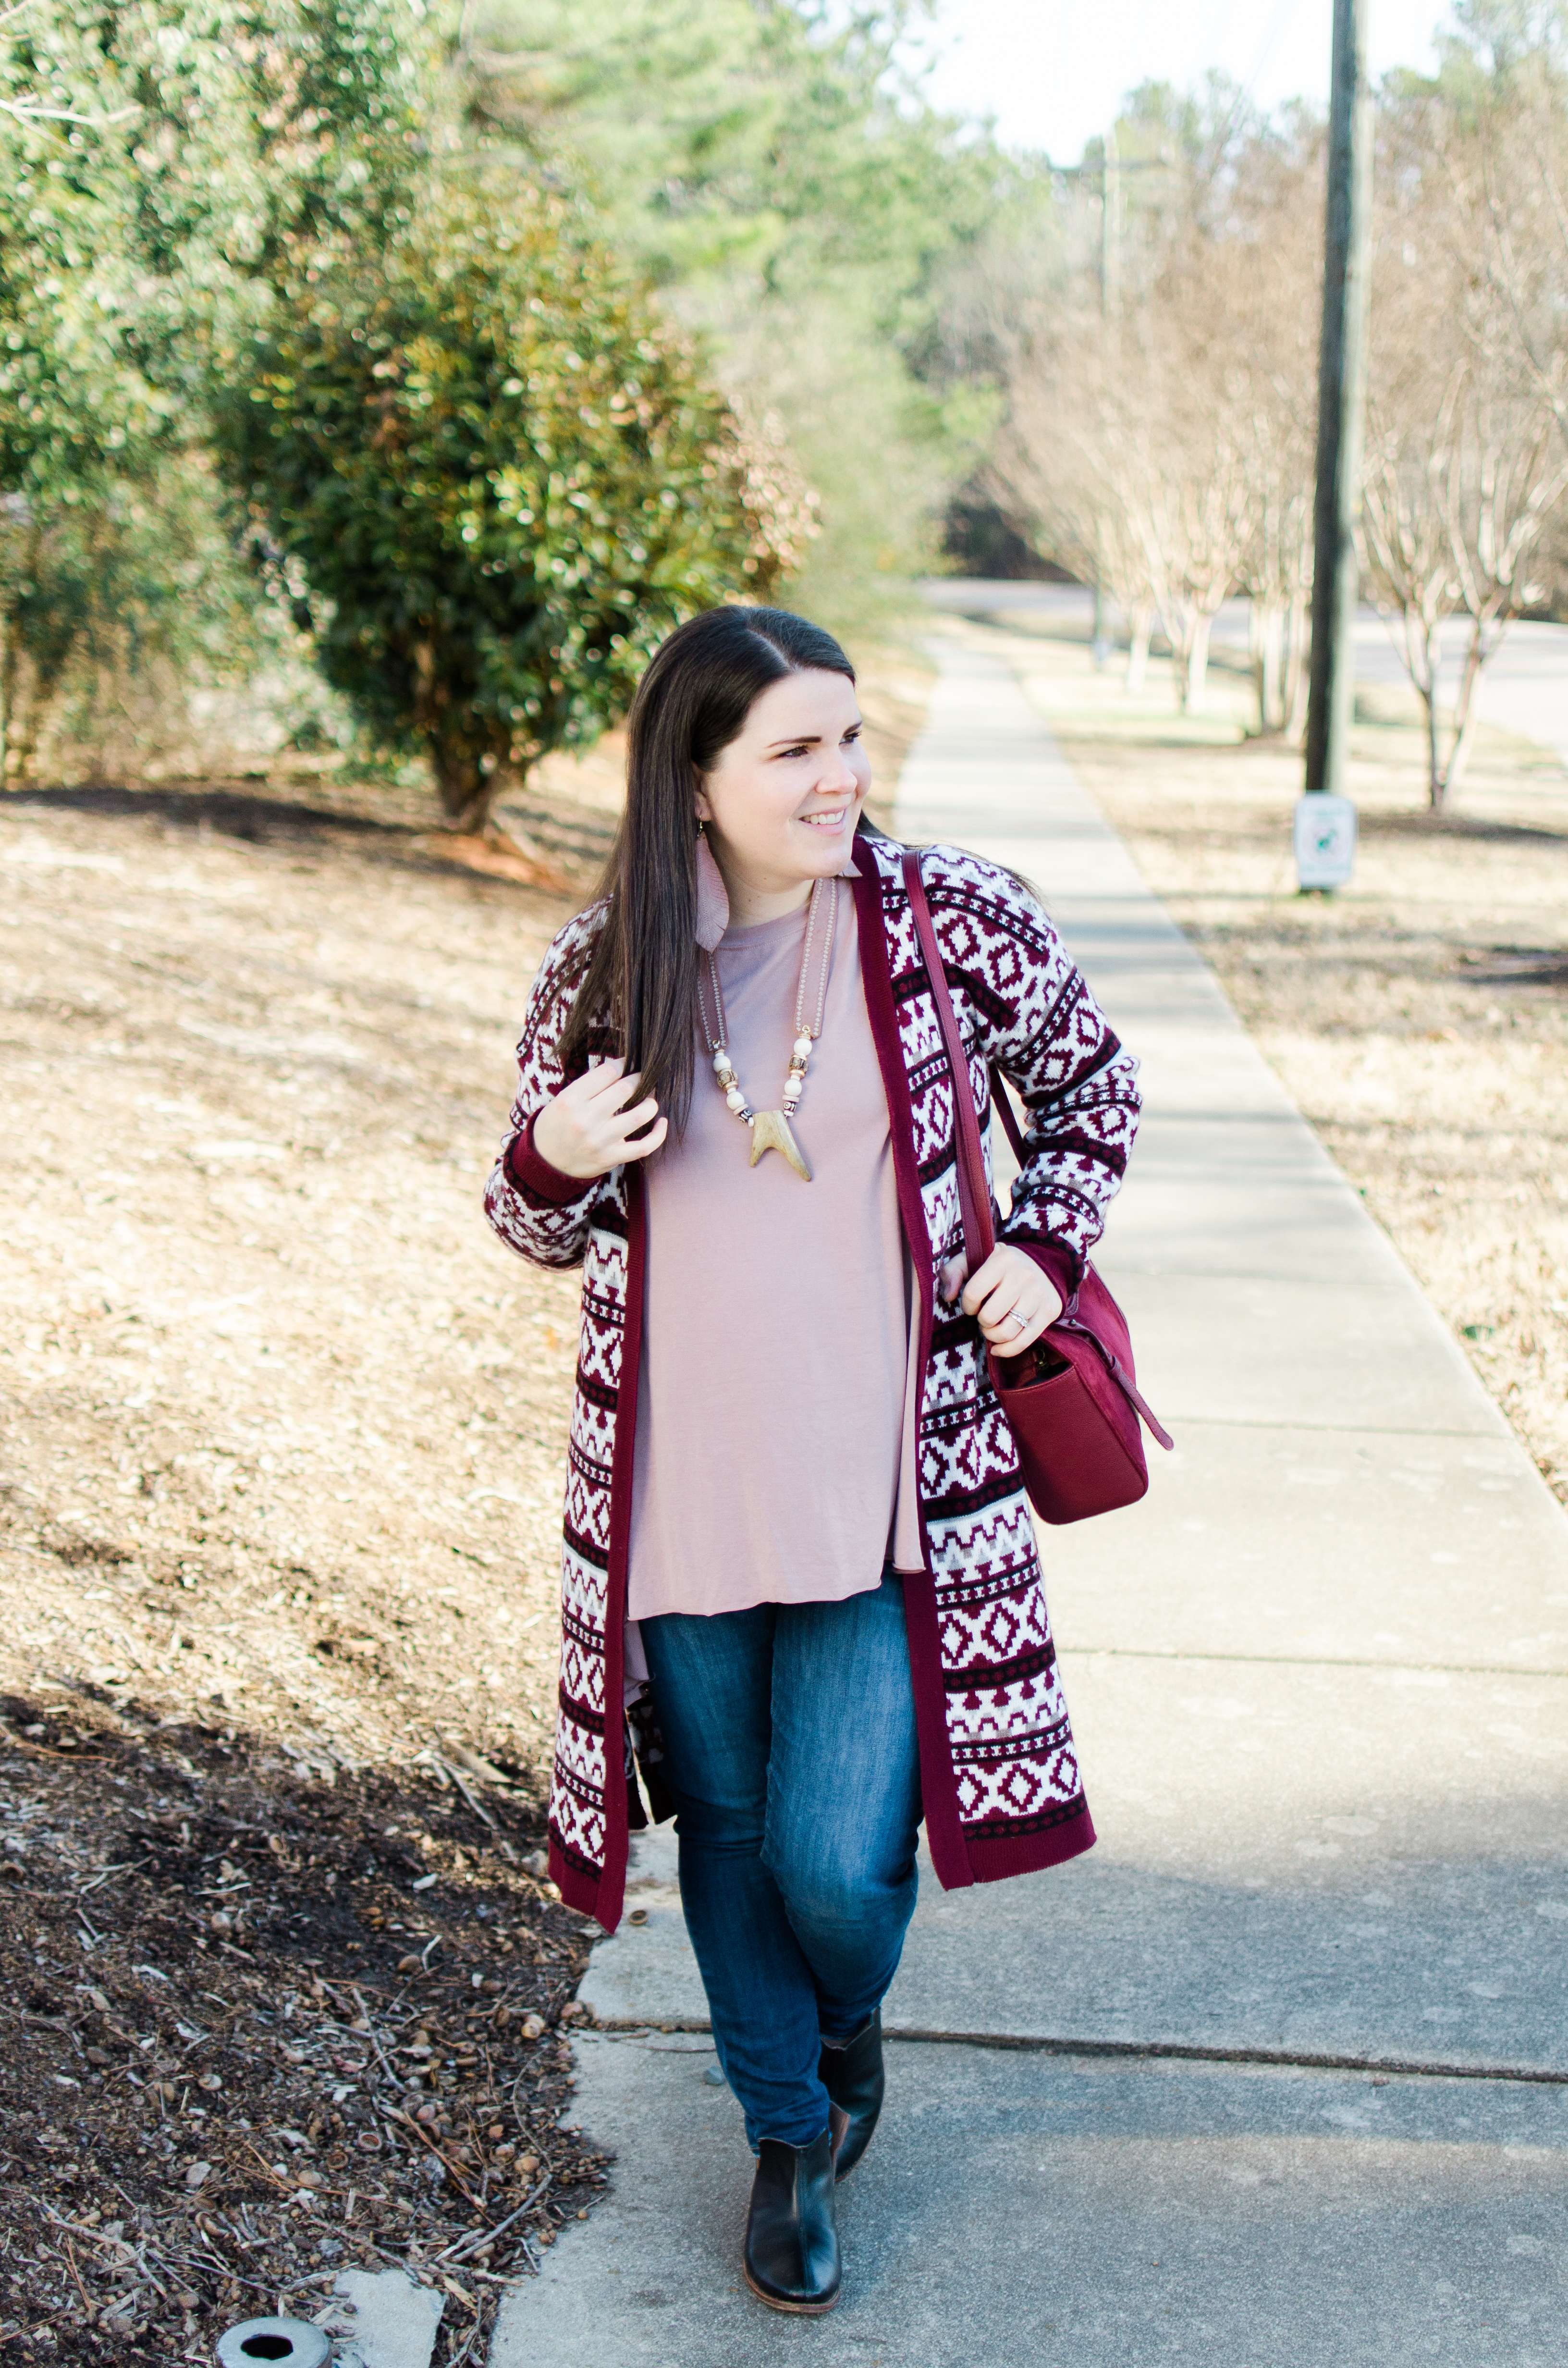 Designed for Joy, October Jaipur, The Root Collective, ethical fashion blogger, ethical style blogger (2) - Fashion for Good Friday by popular North Carolina fashion blogger Still Being Molly